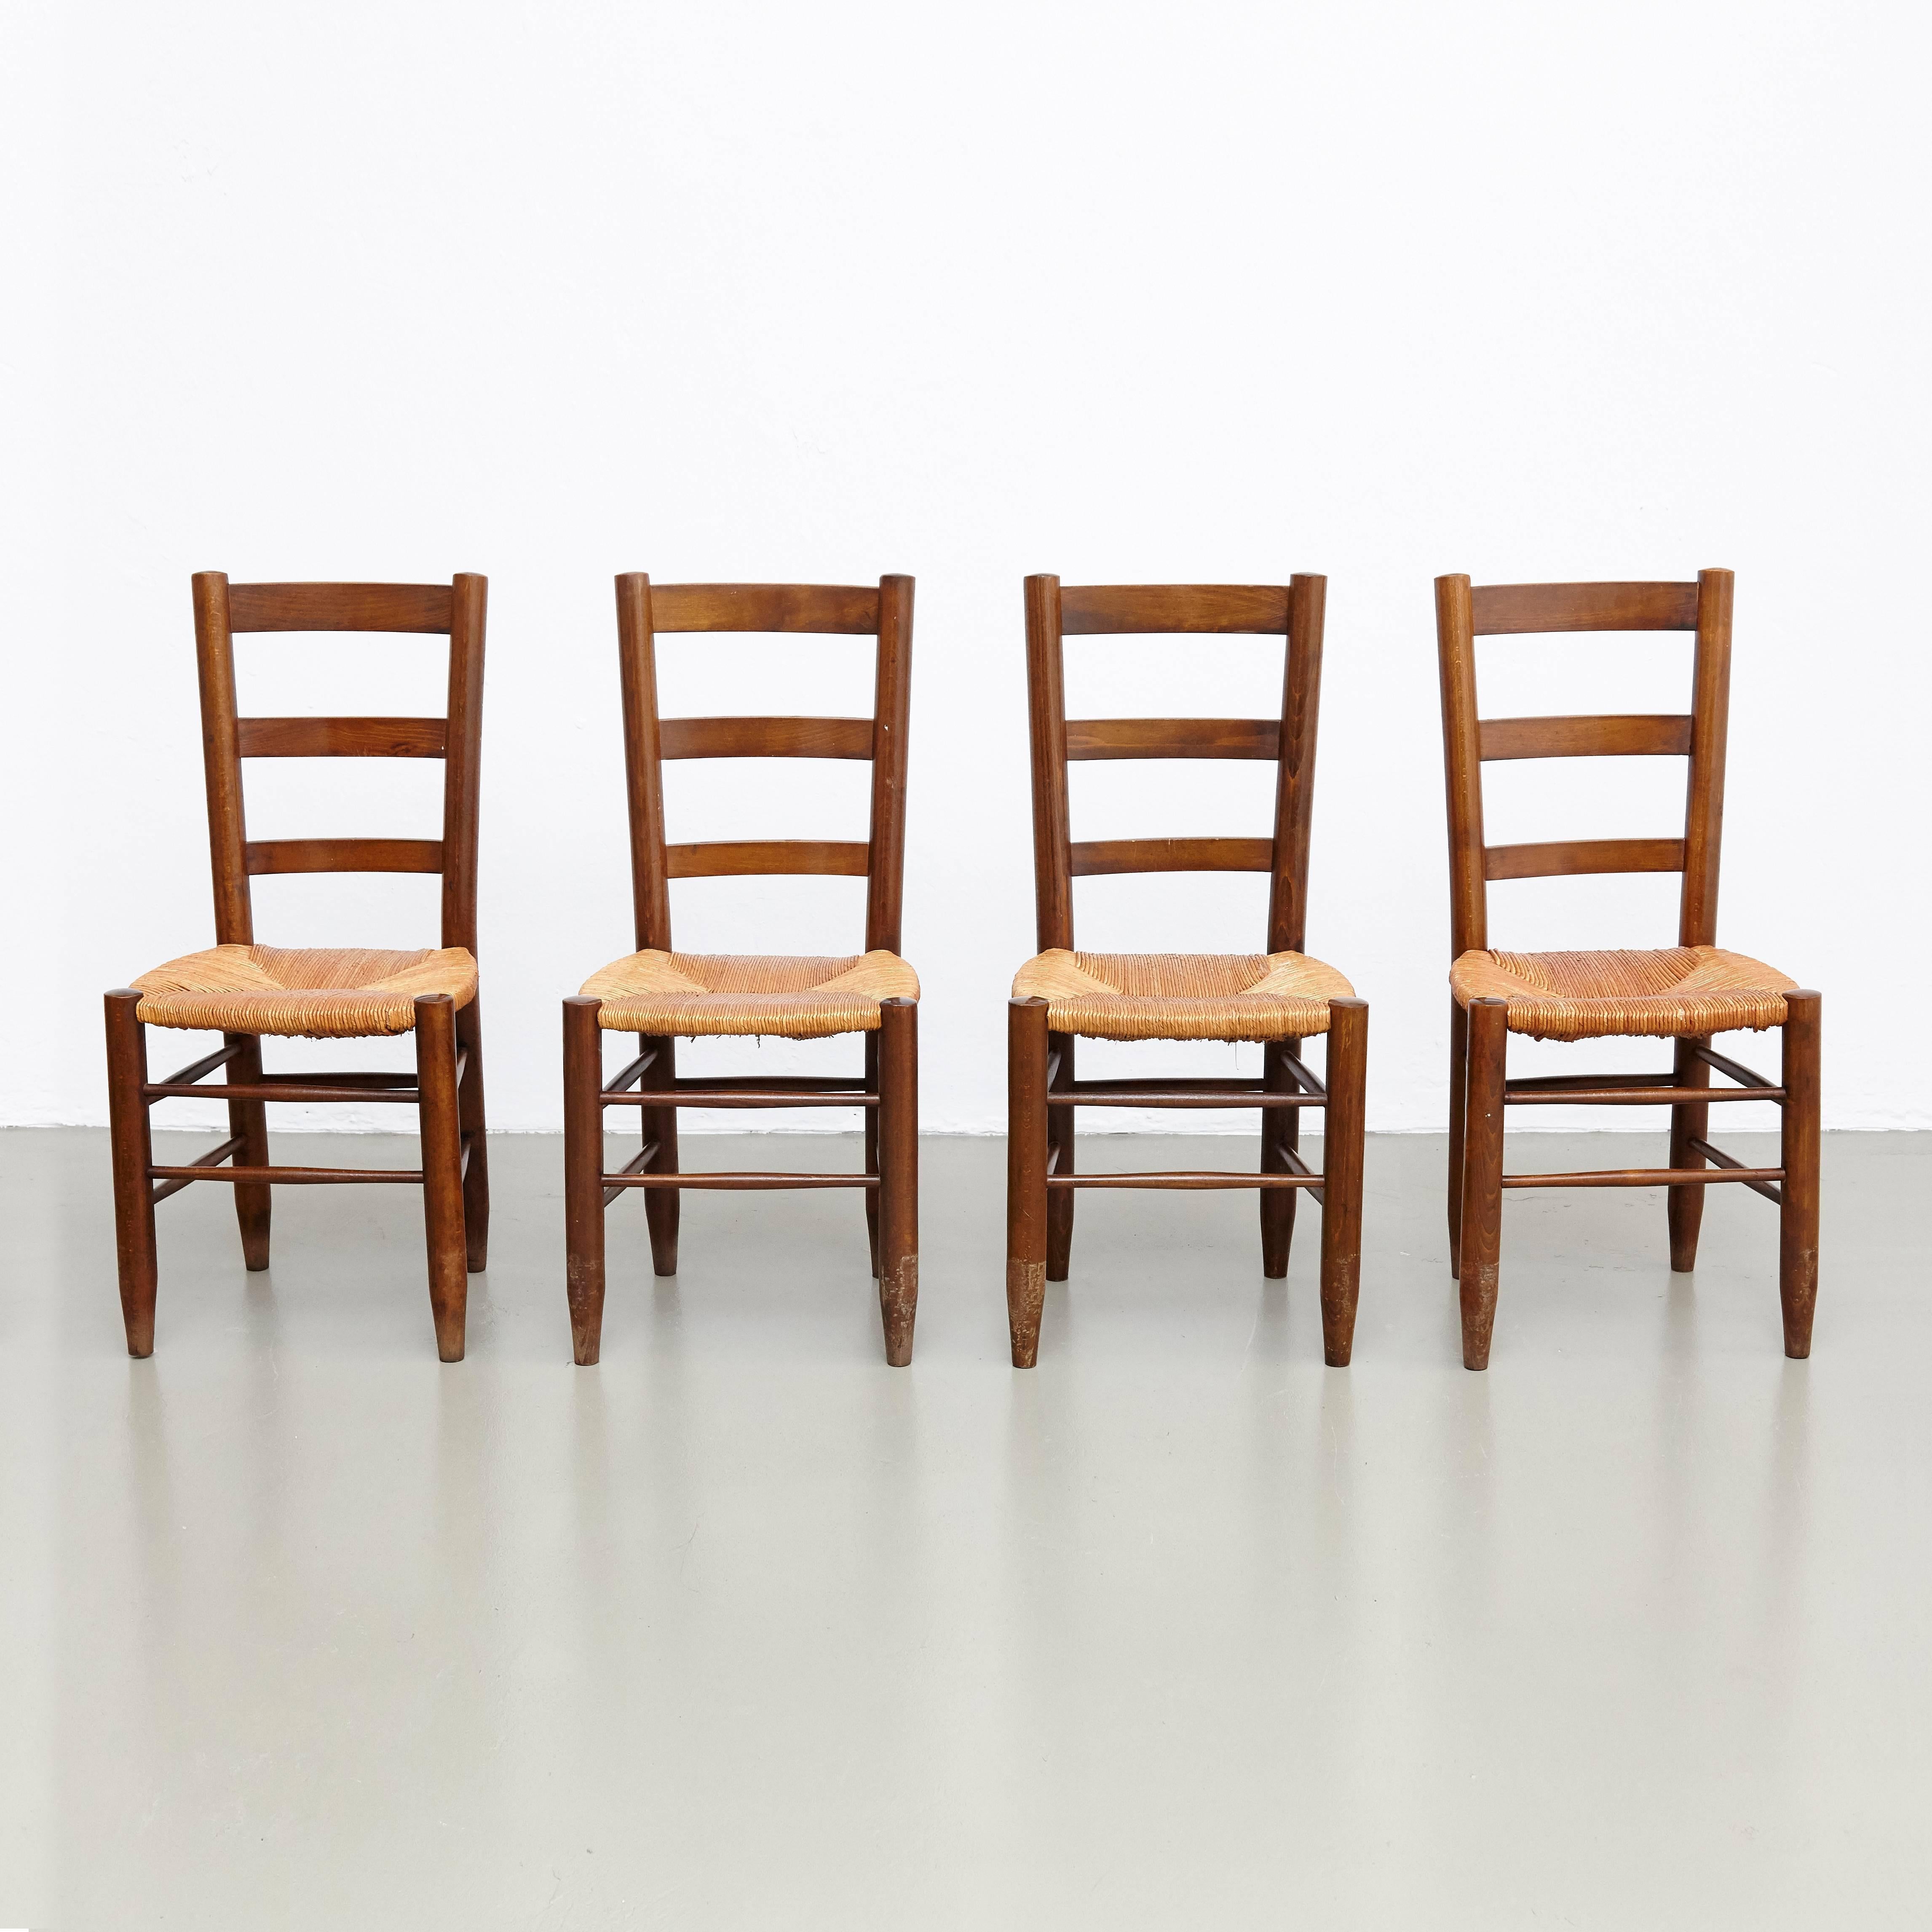 Set of four dining chairs, model no. 19, designed by Charlotte Perriand, circa 1950.

Solid wood base and legs, and rush seat.

In good original condition, with minor wear consistent with age and use, preserving a beautiful patina. The seats